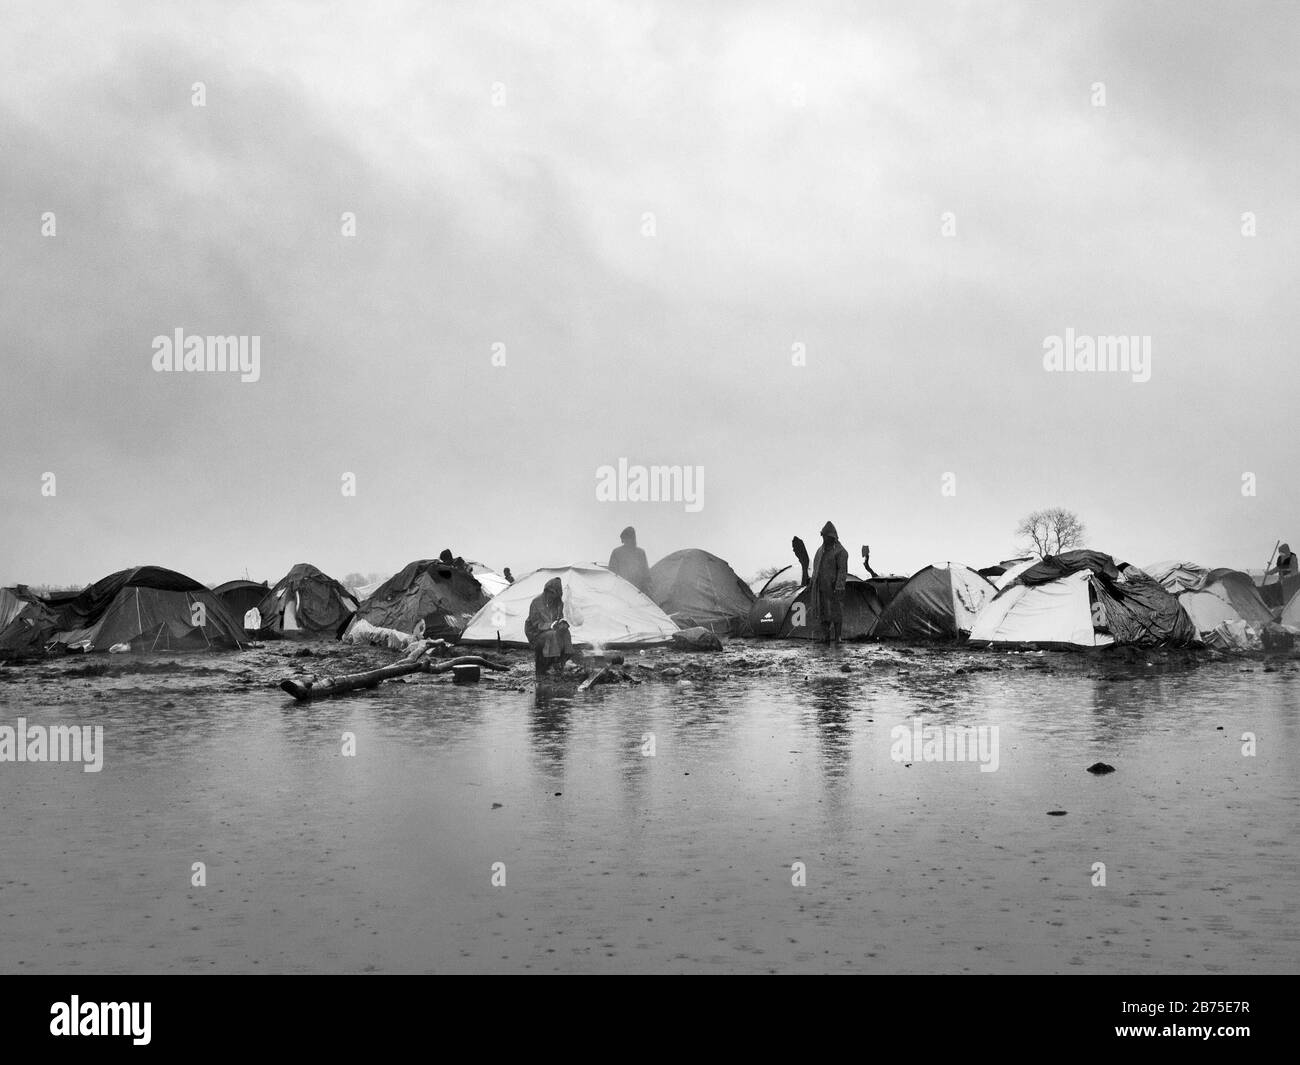 Refugee camp in Idomeni on the border with Macedonia. After days of rainfall, huge lakes have formed in the camp. [automated translation] Stock Photo